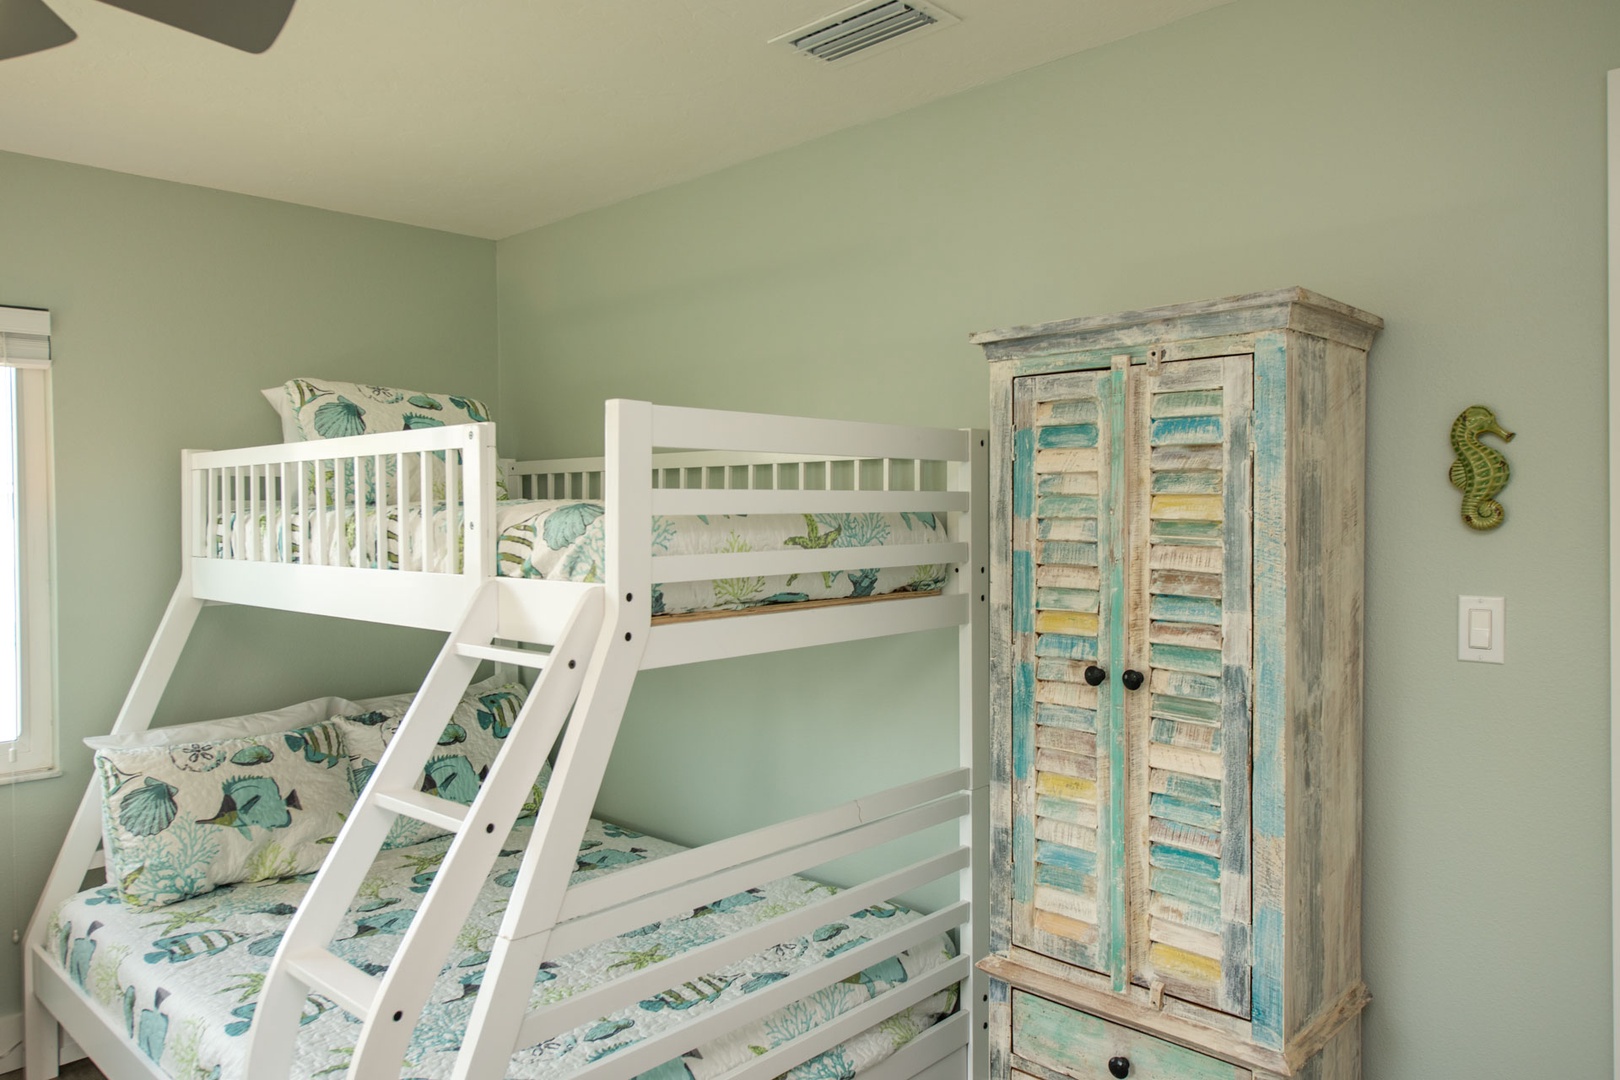 Bunkbed design and storage cabinet